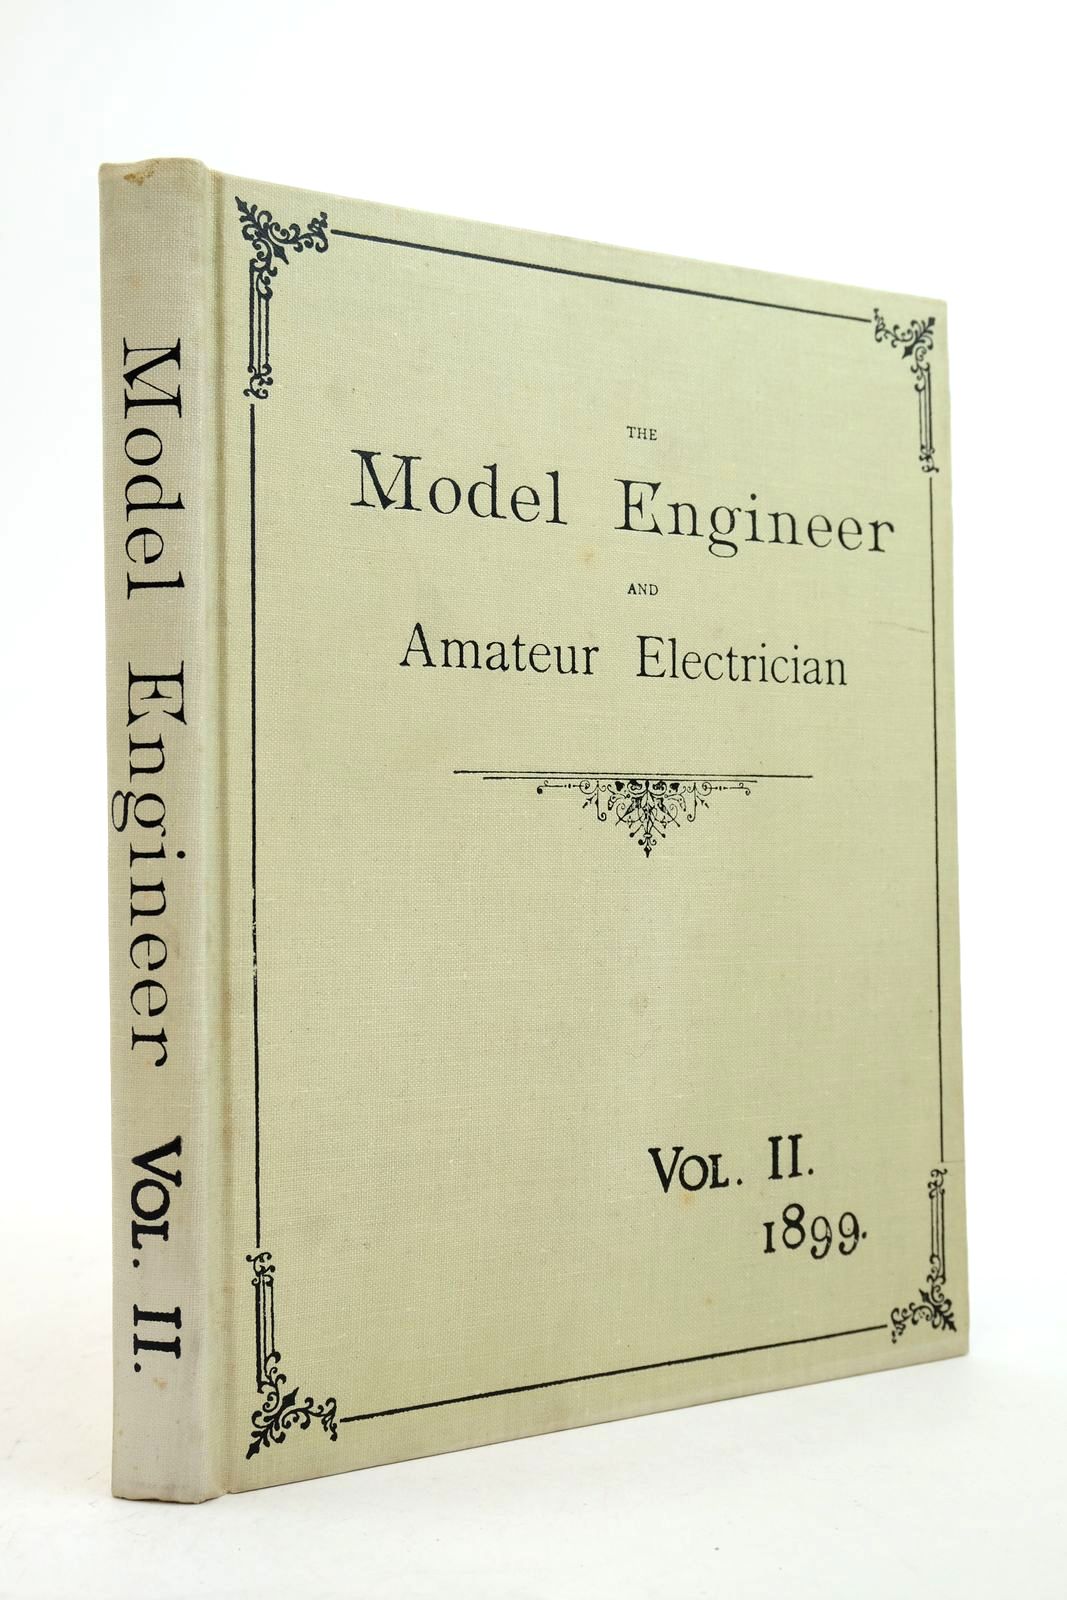 Photo of THE MODEL ENGINEER AND AMATEUR ELECTRICIAN VOL. II - 1899 written by Marshall, Percival published by Dawbarn & Ward Limited, Argus Books Ltd (STOCK CODE: 2139856)  for sale by Stella & Rose's Books